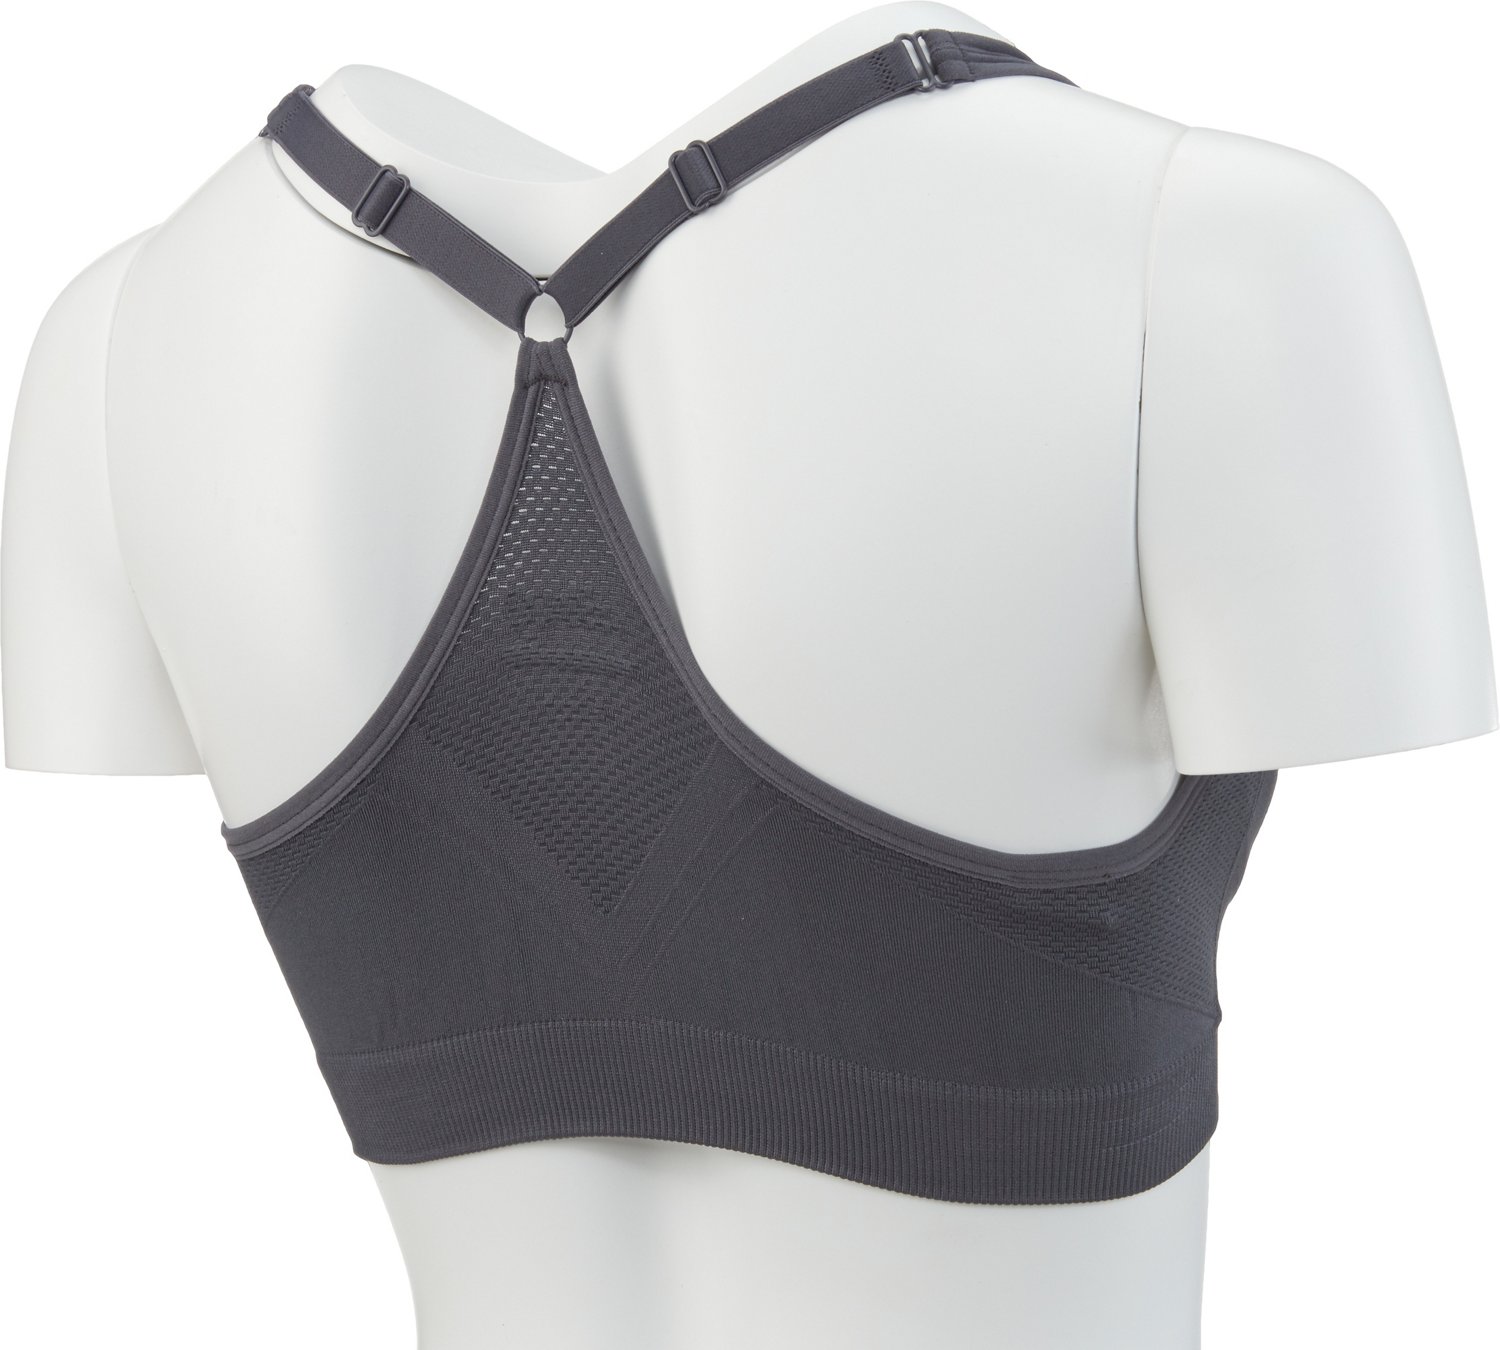 BCG Women's Molded Cup Low Impact Sports Bra